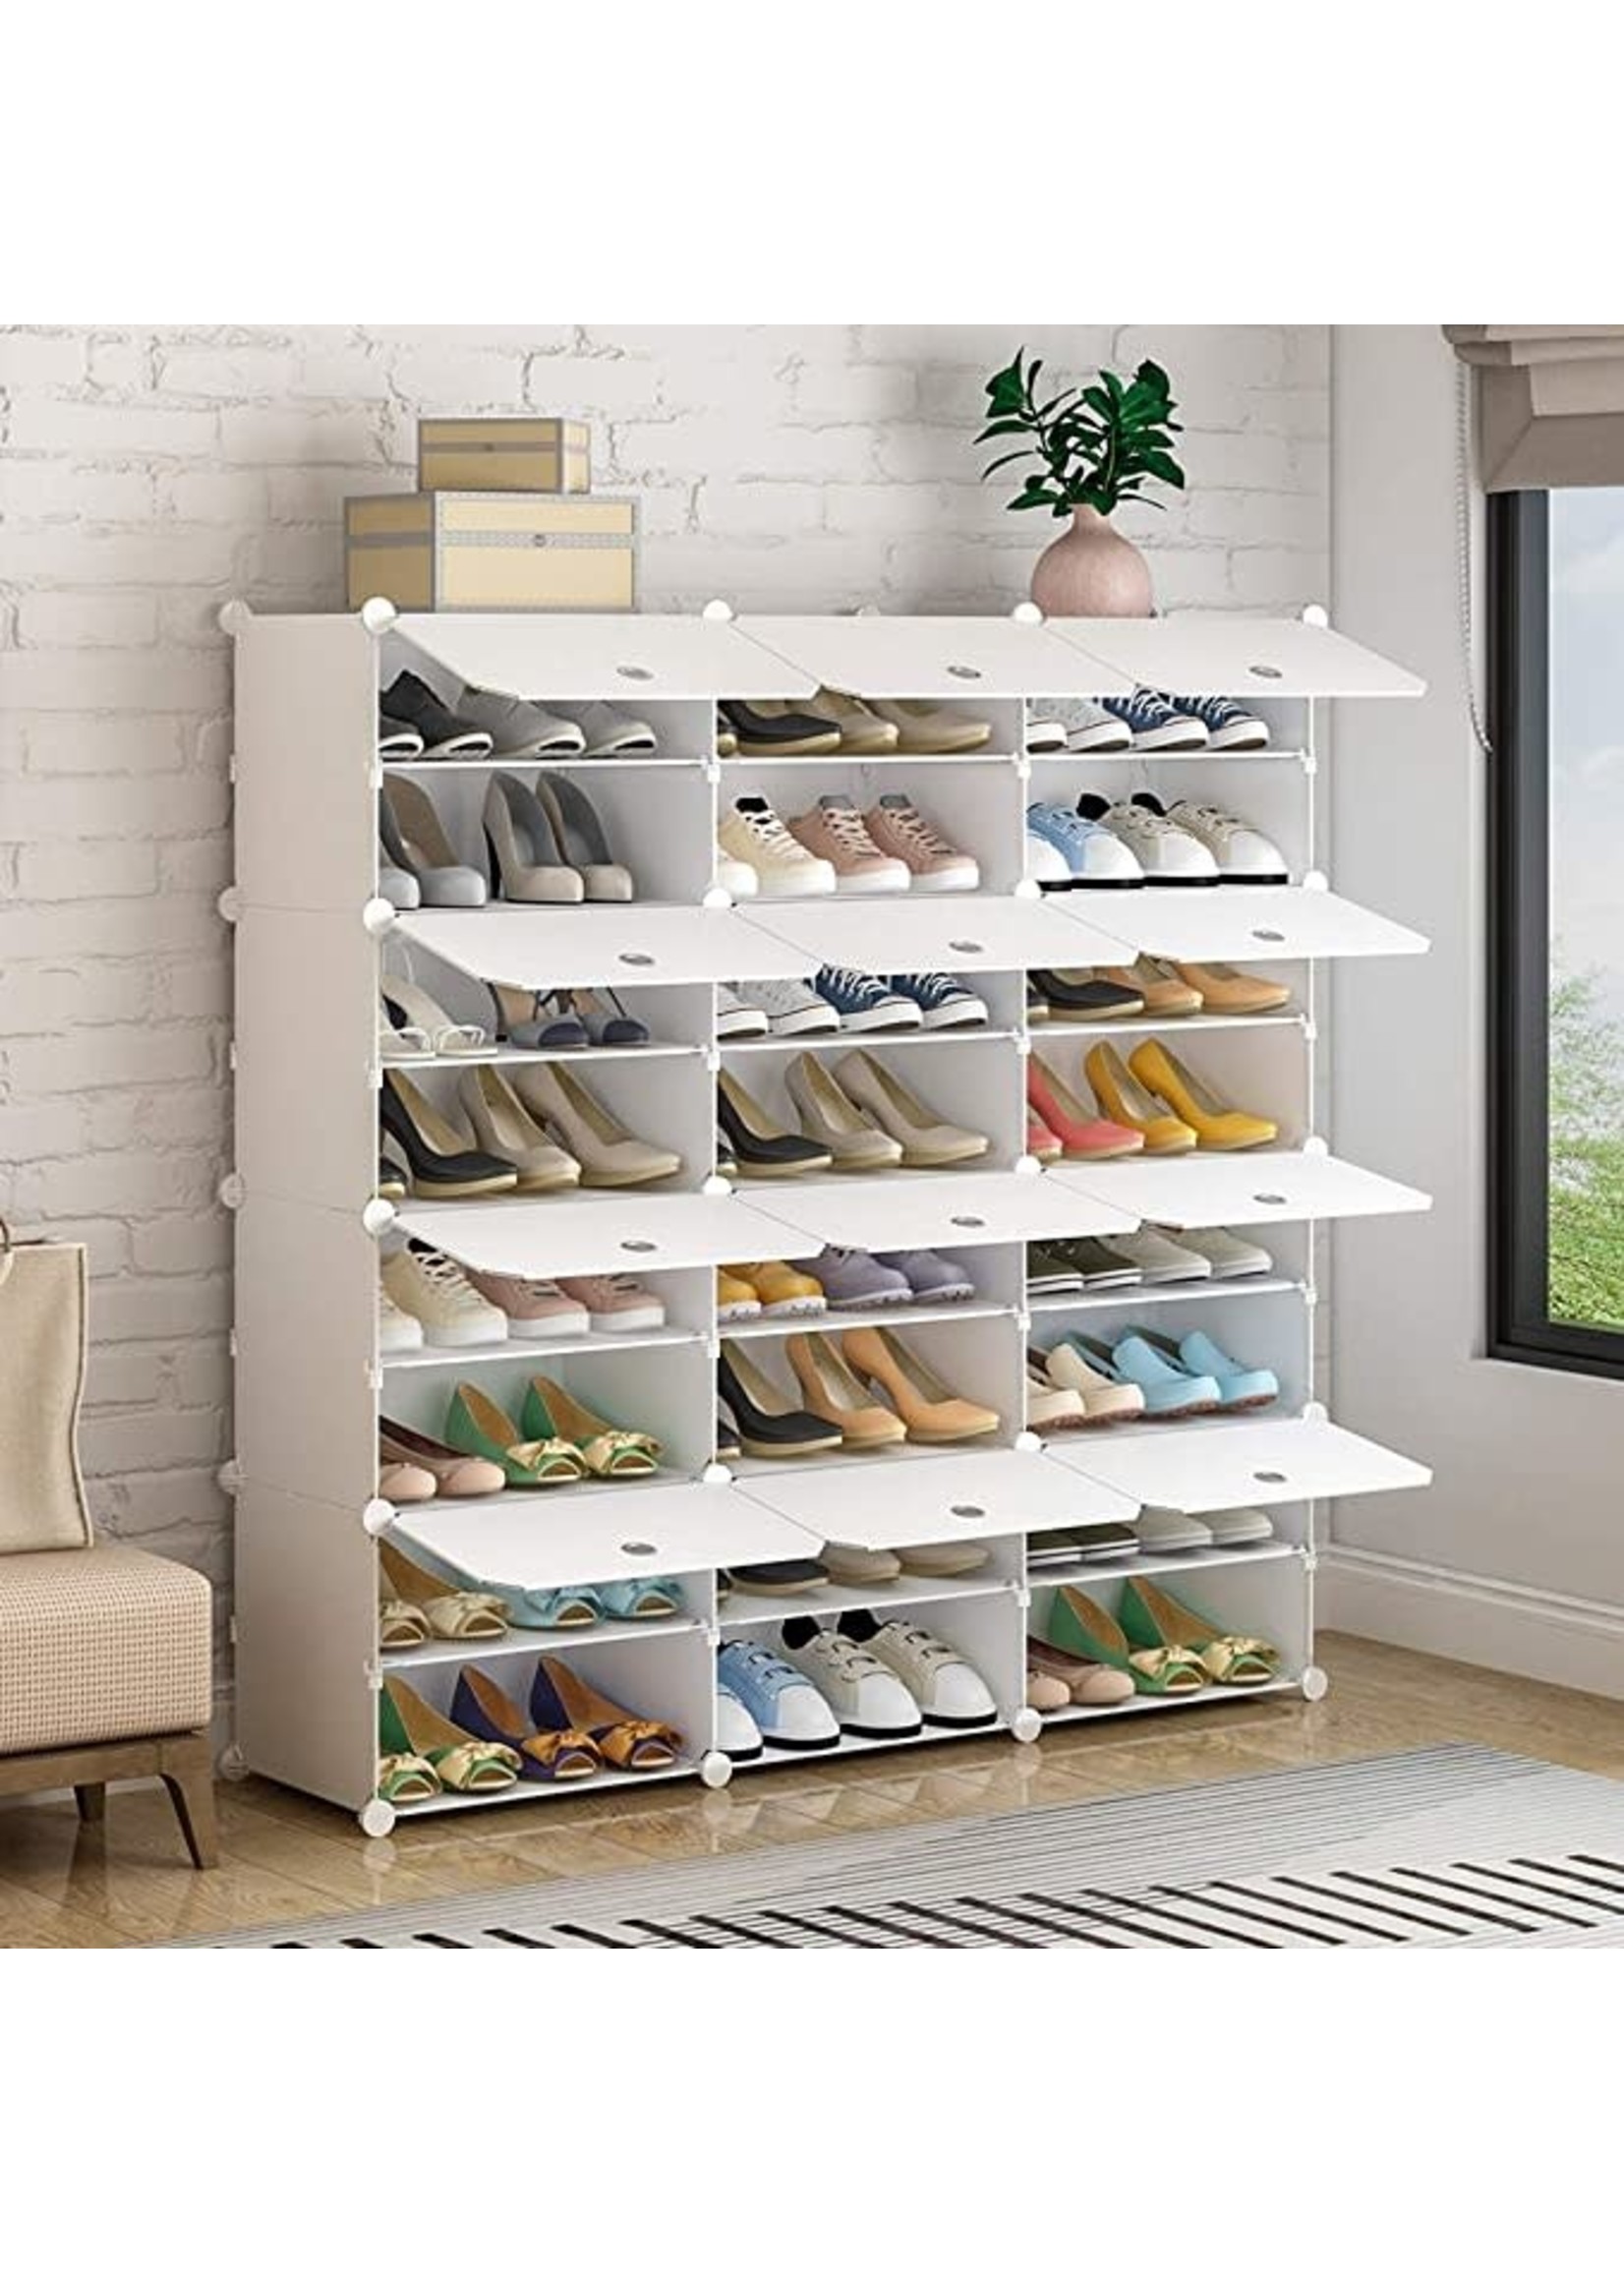 KOUSI Portable Shoe Rack Organizer 24 Grids Tower Shelf Storage Cabinet Stand Expandable for Heels, Boots, Slippers, White